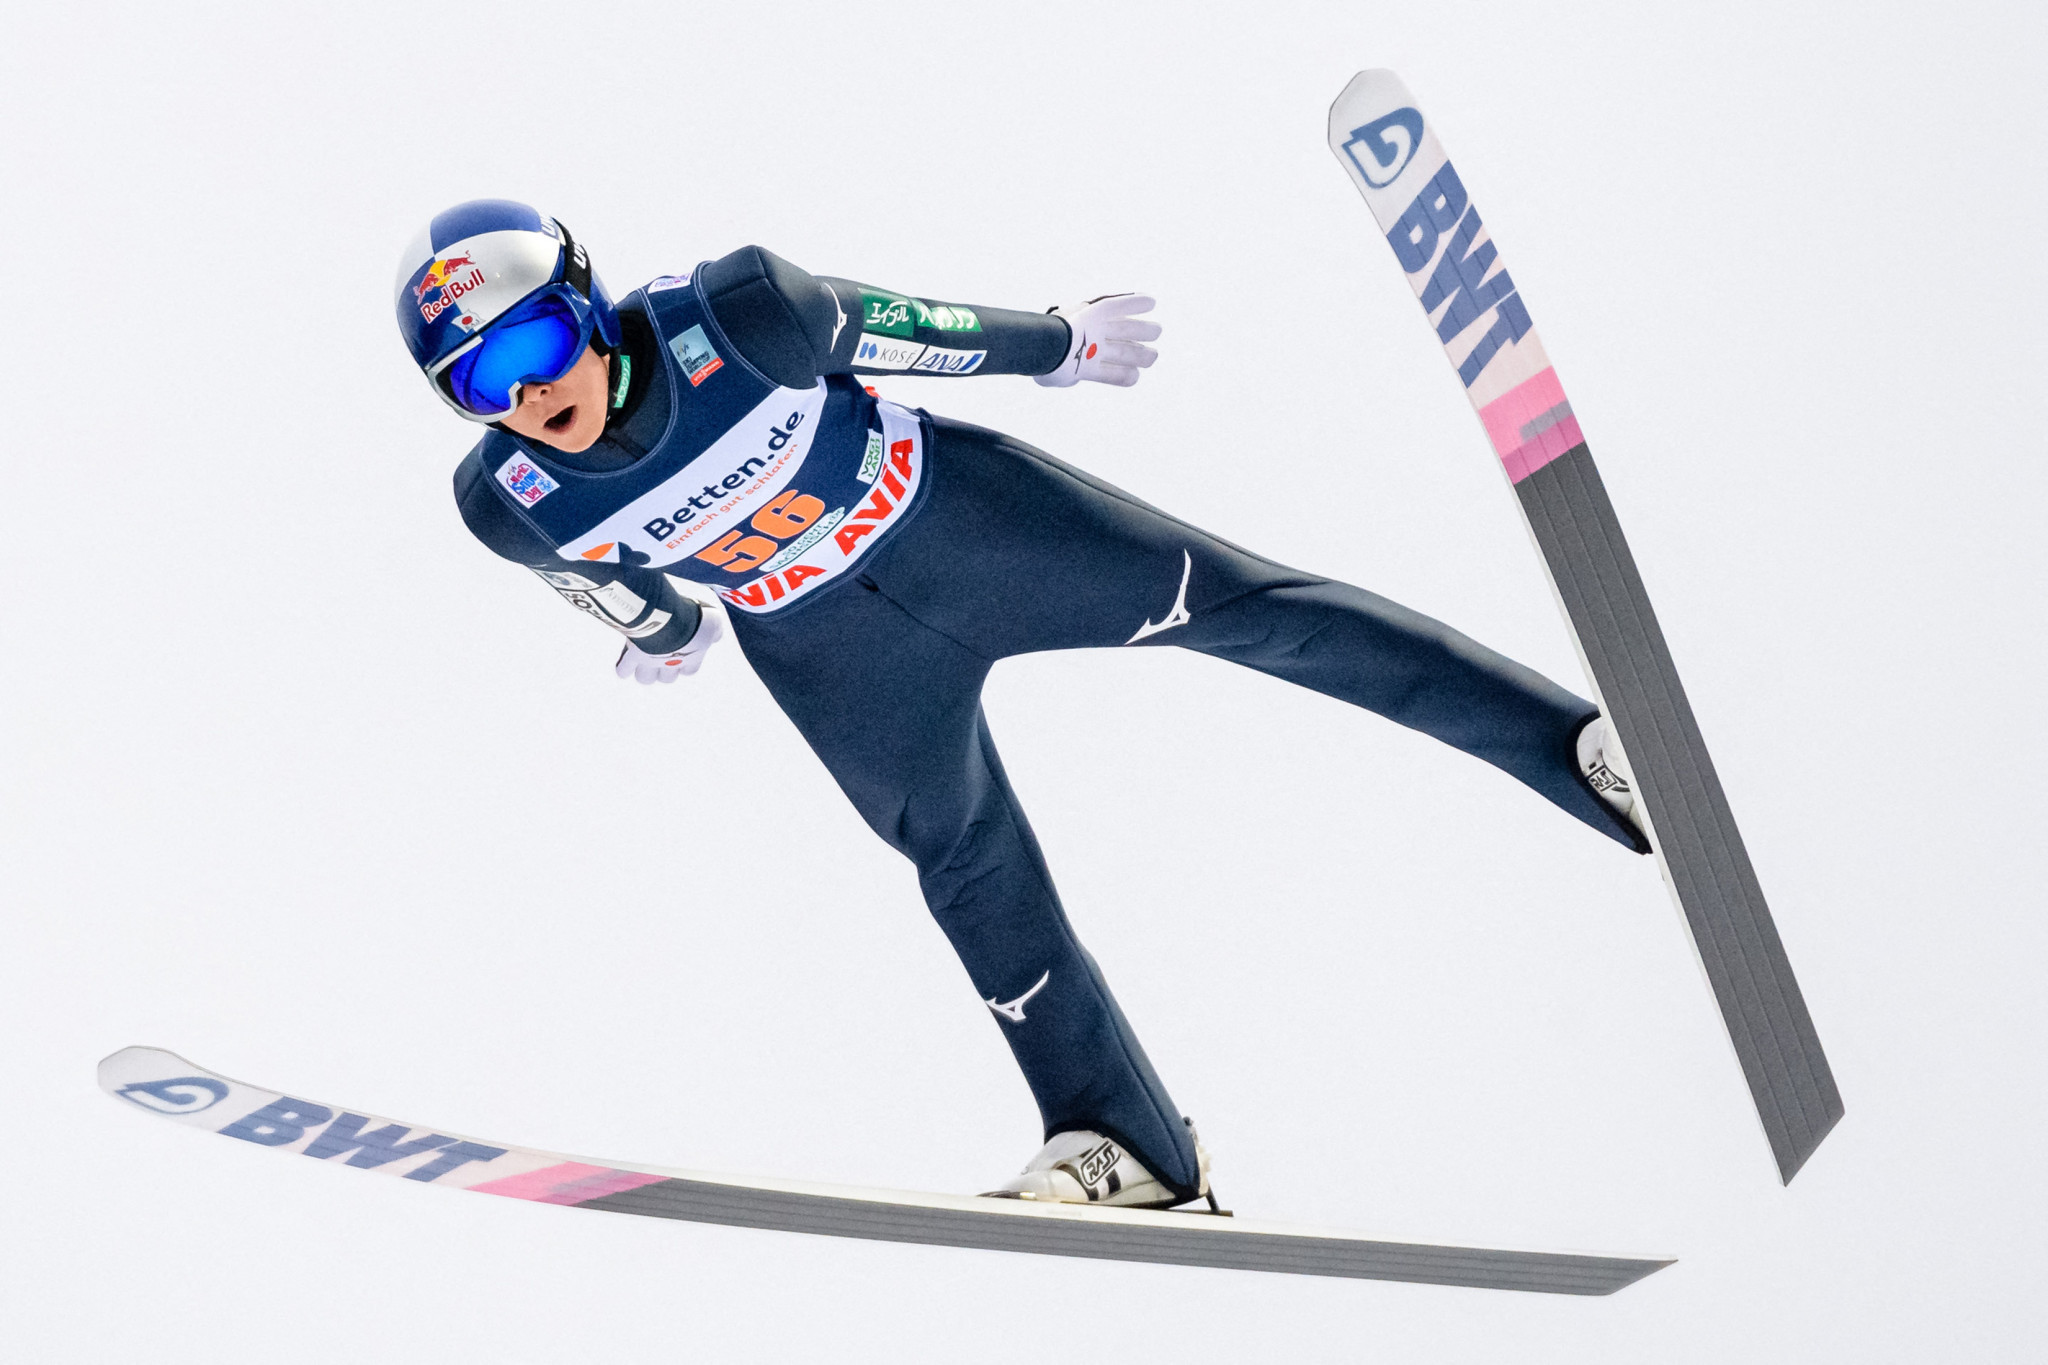 Ryoyu Kobayashi leads qualifying in the FIS Ski Jumping World Cup event in Engelberg ©Getty Images